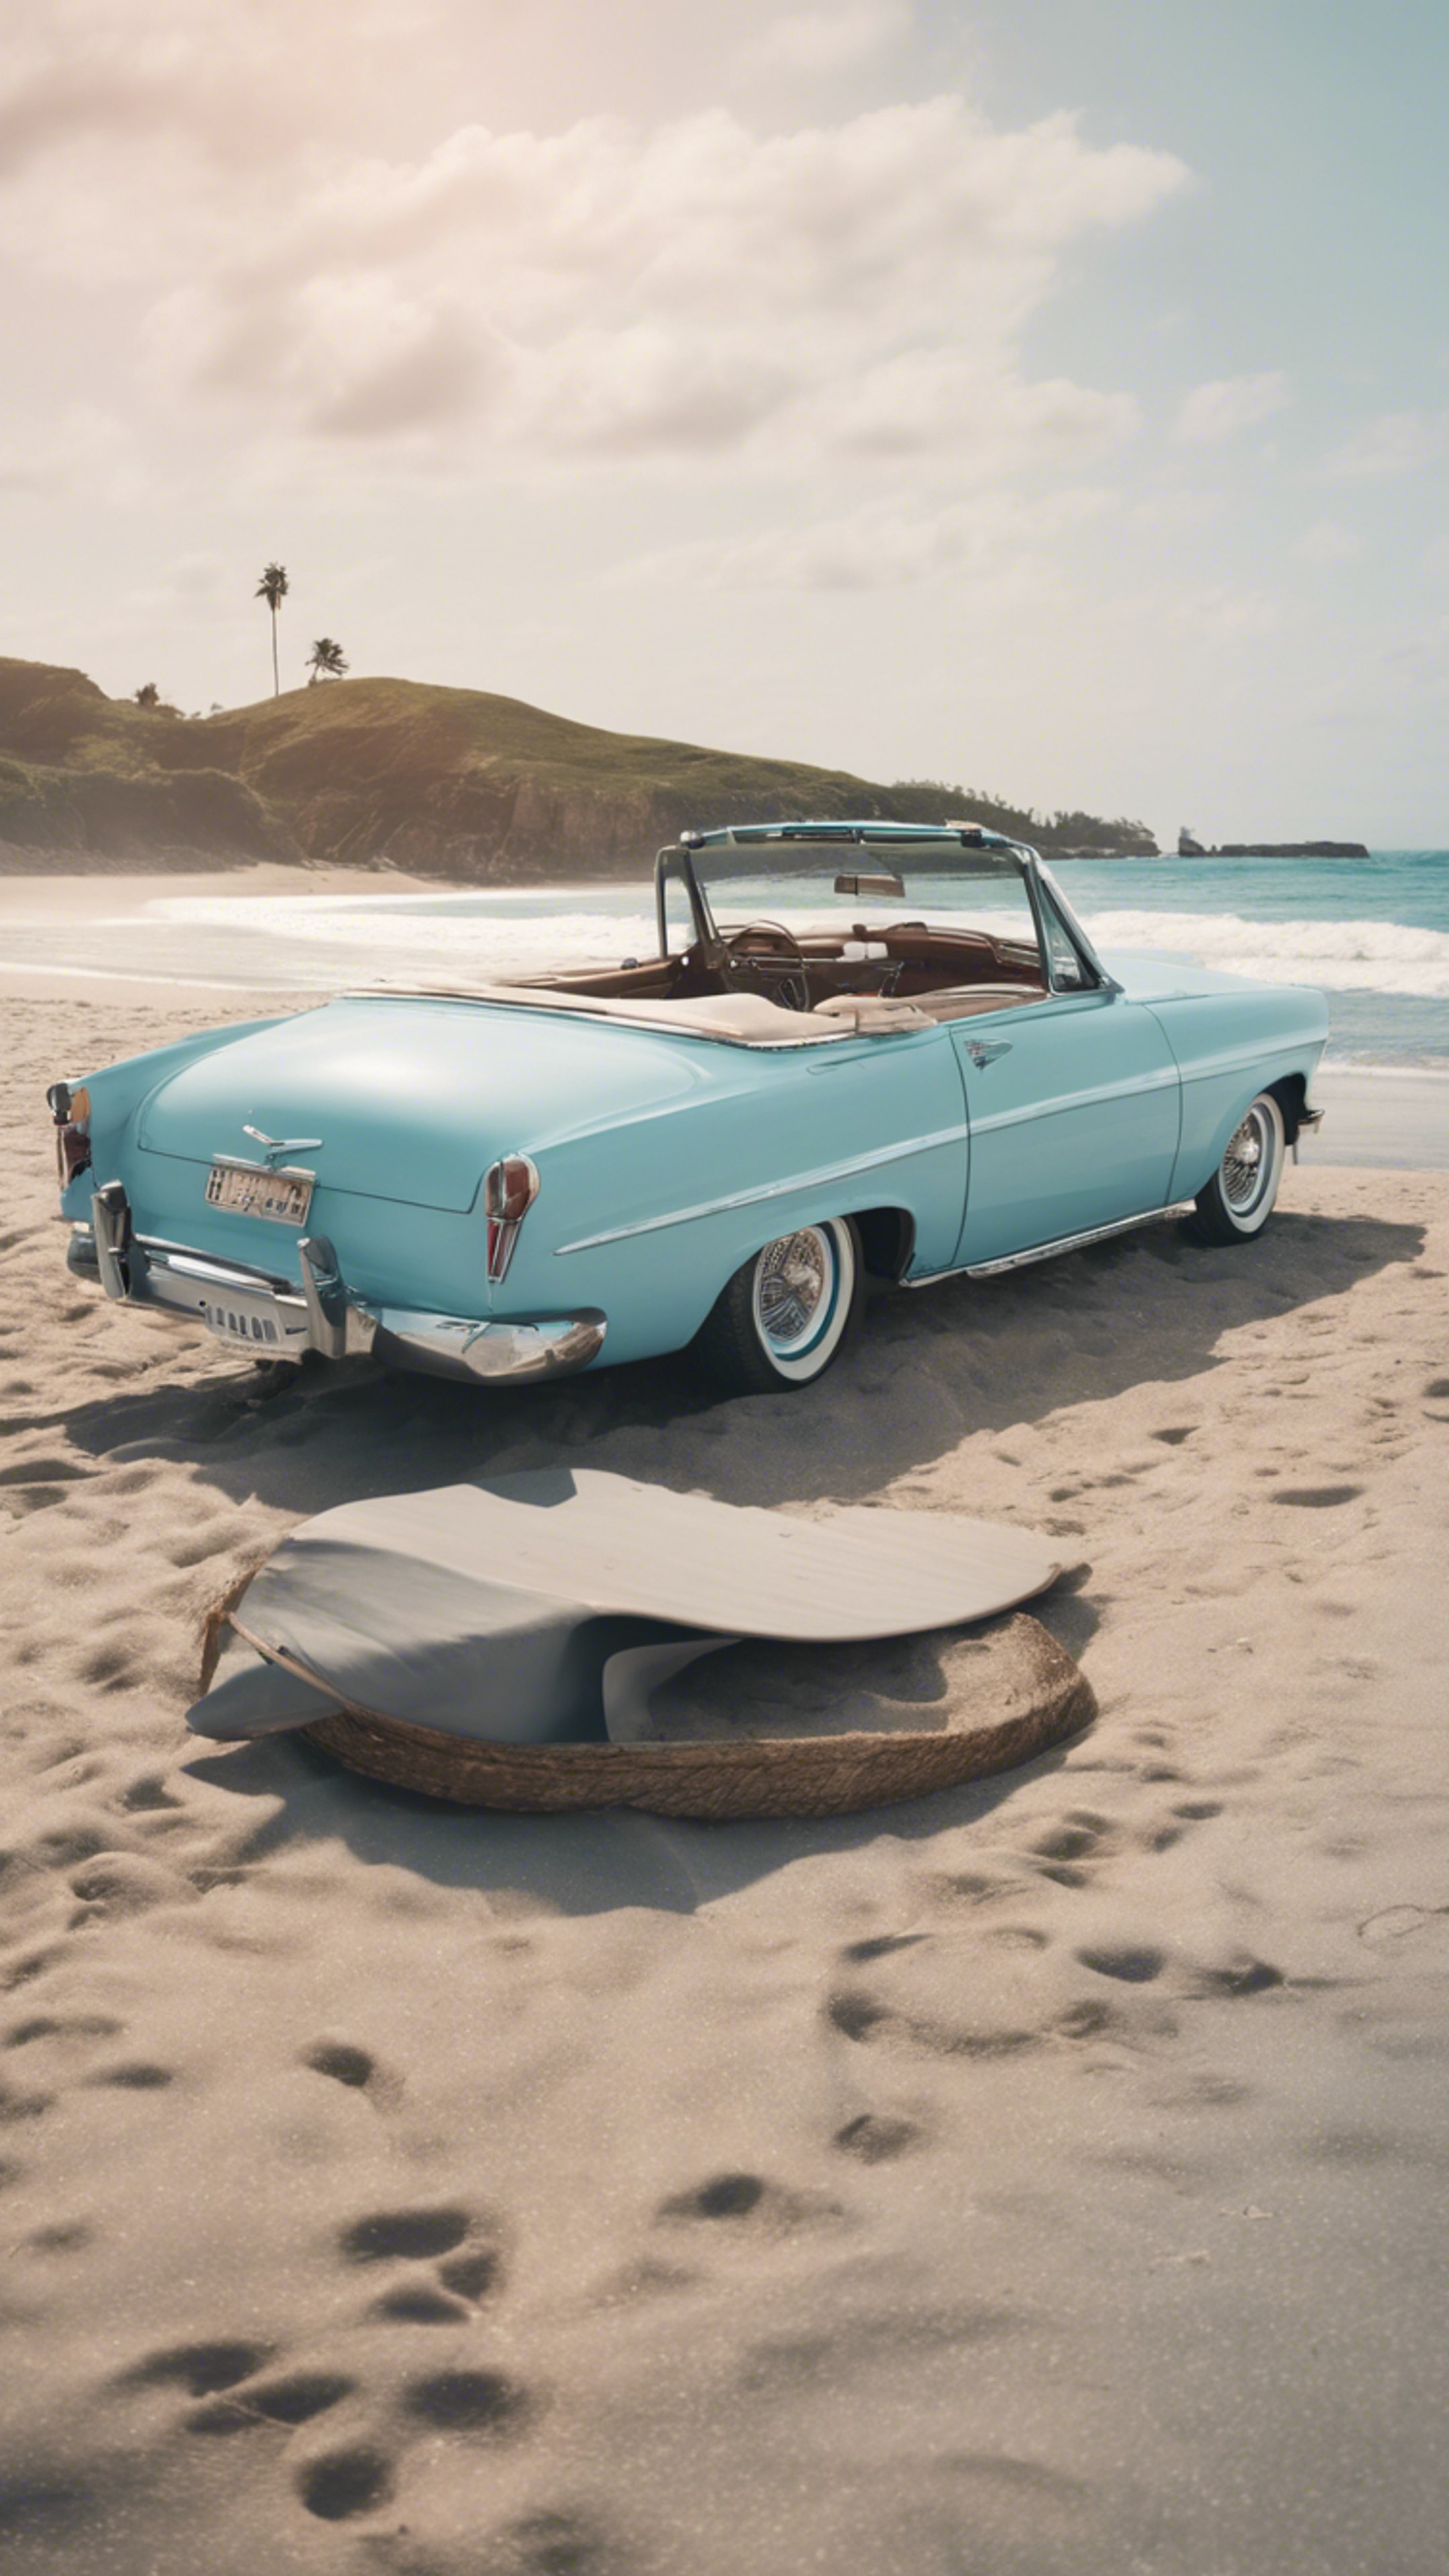 A vintage pastel blue convertible parked by a beach with surfboards leaning against it. 牆紙[b081d9fd70654569bba1]